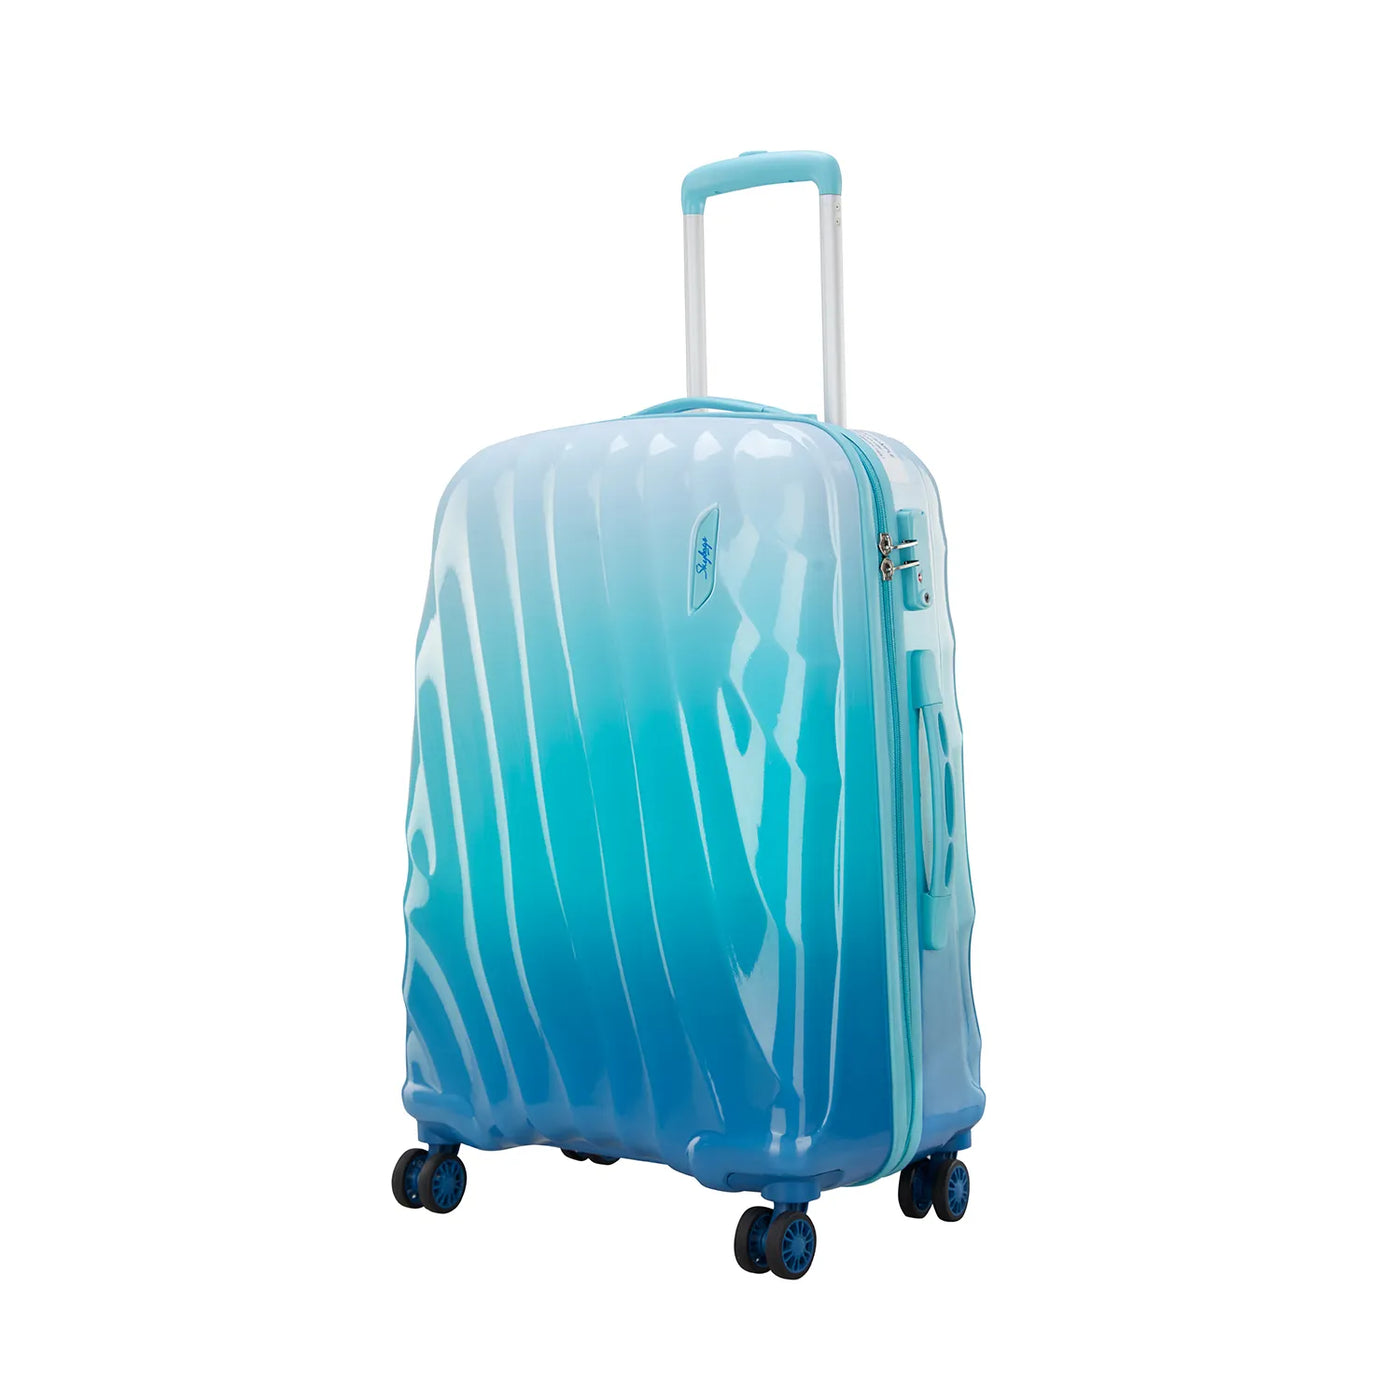 Trolley Bag For Traveling at Best Price in Indore  Need Bags